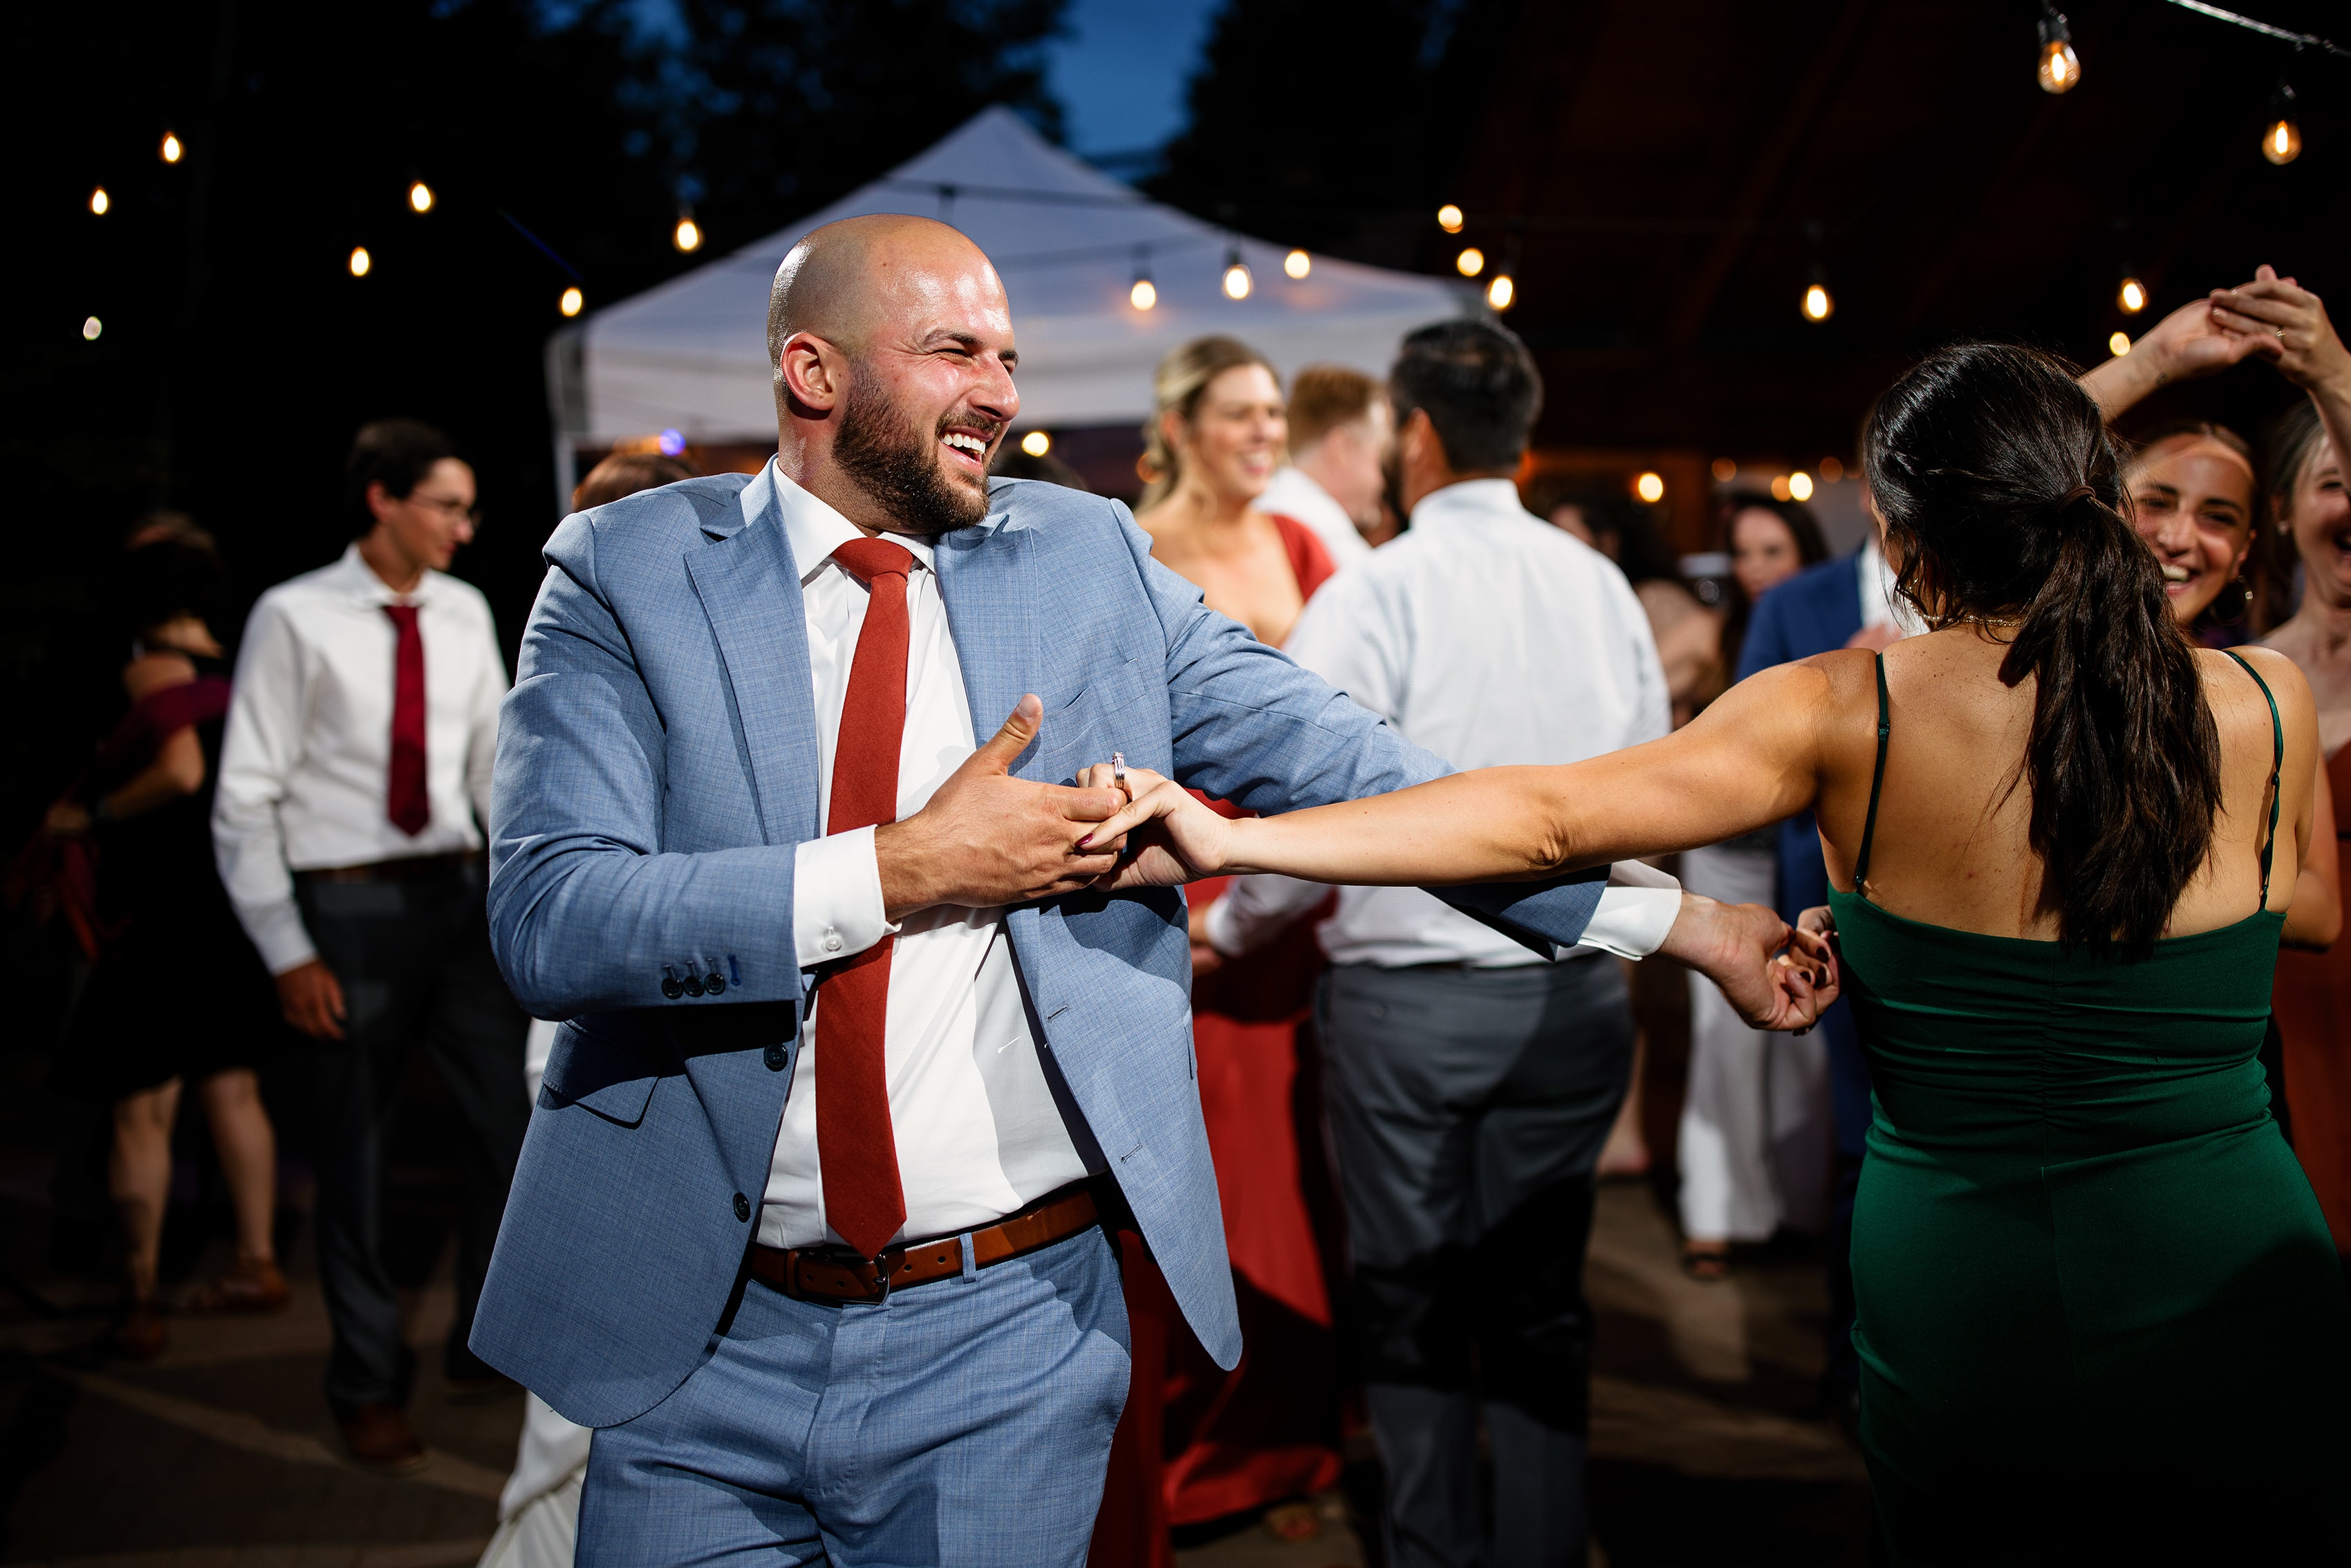 Guests dance during a wedding reception at Mountain Wedding Garden in Crested Butte